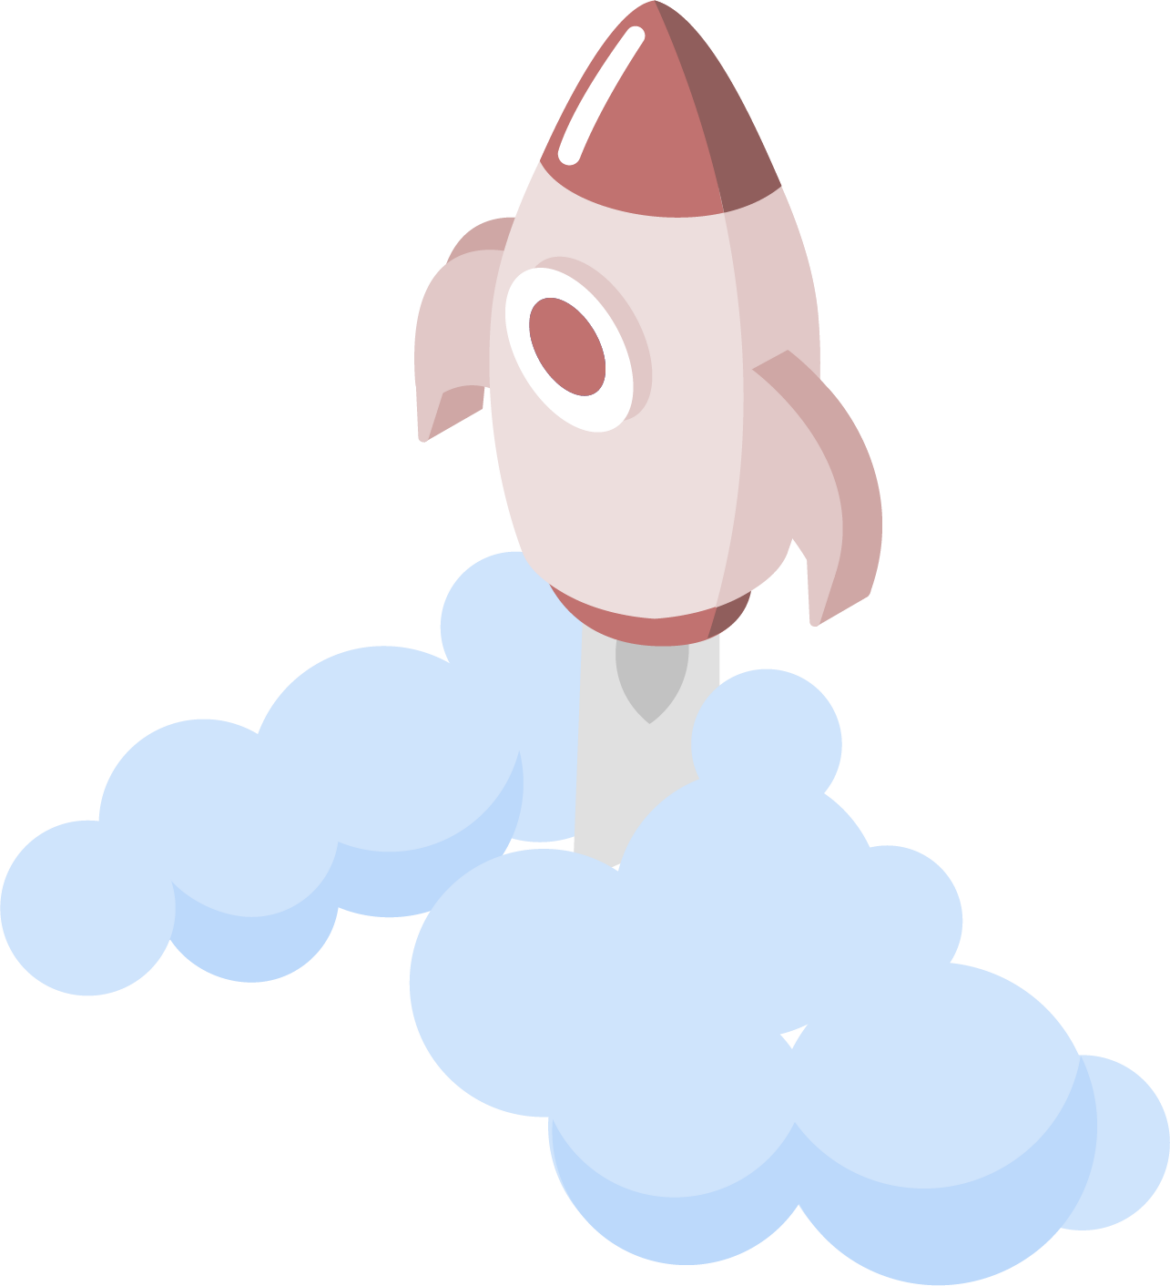 Vector illustration of a pale pink rocket, setting off with a pale blue cloud below it.